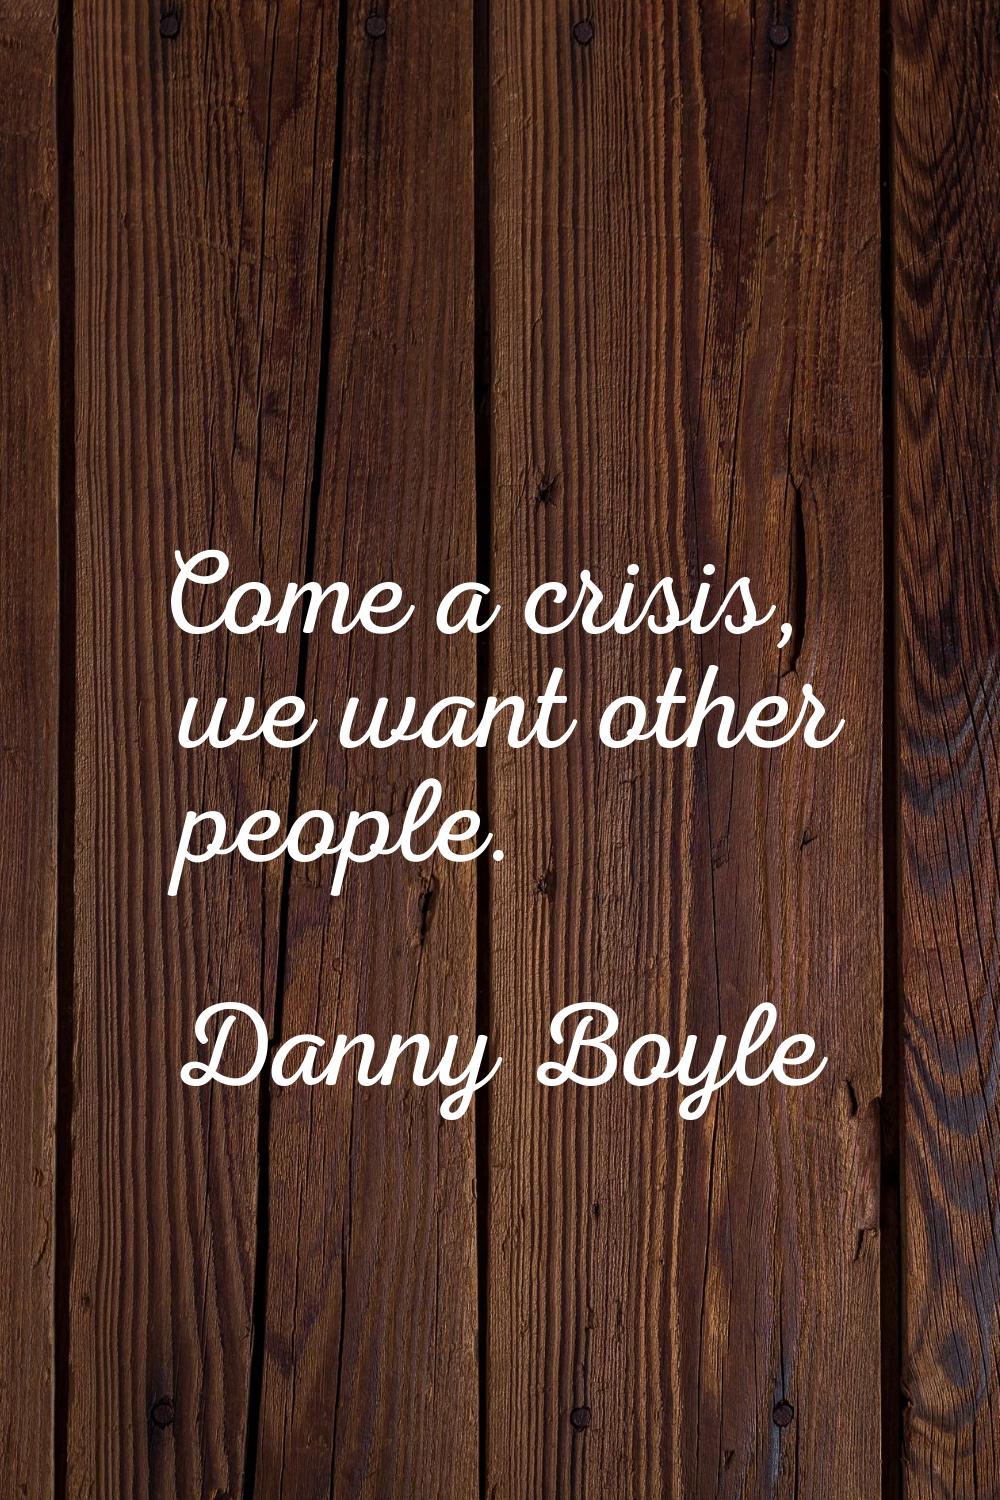 Come a crisis, we want other people.